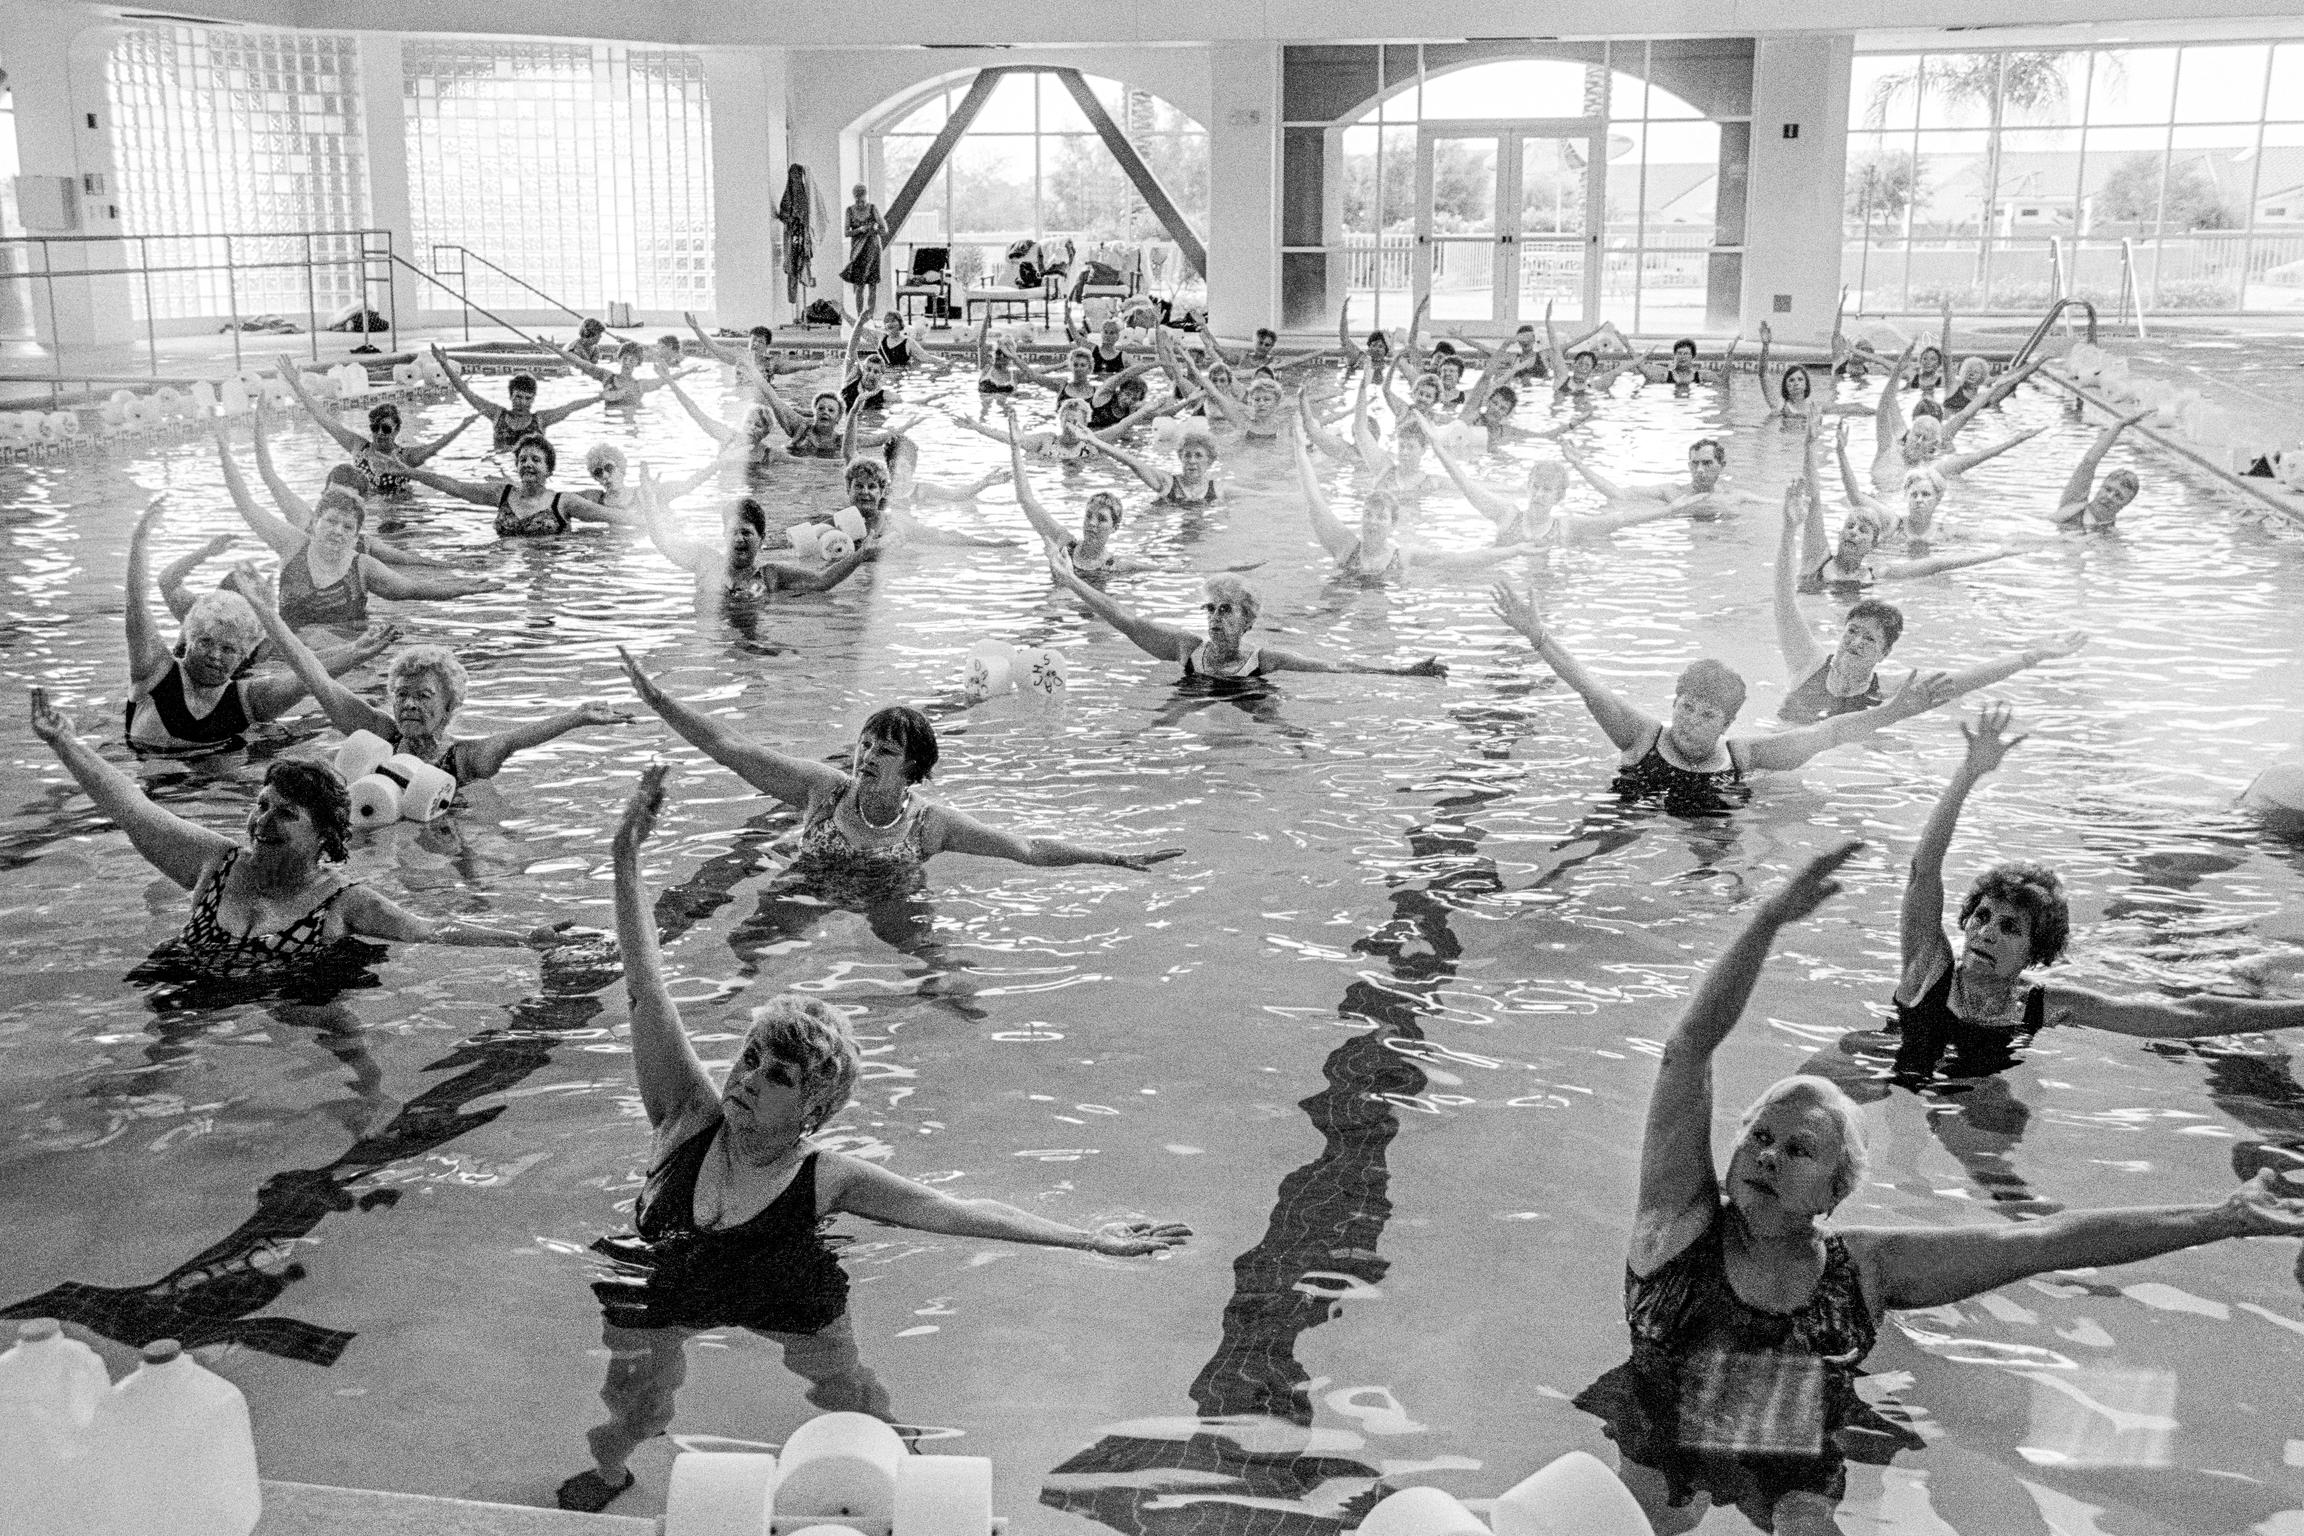 Pool Exercise. A positive aspect of American seniors is their realisation that the correct exercise is not only useful to prolong active life but is also fun. Arizona USA